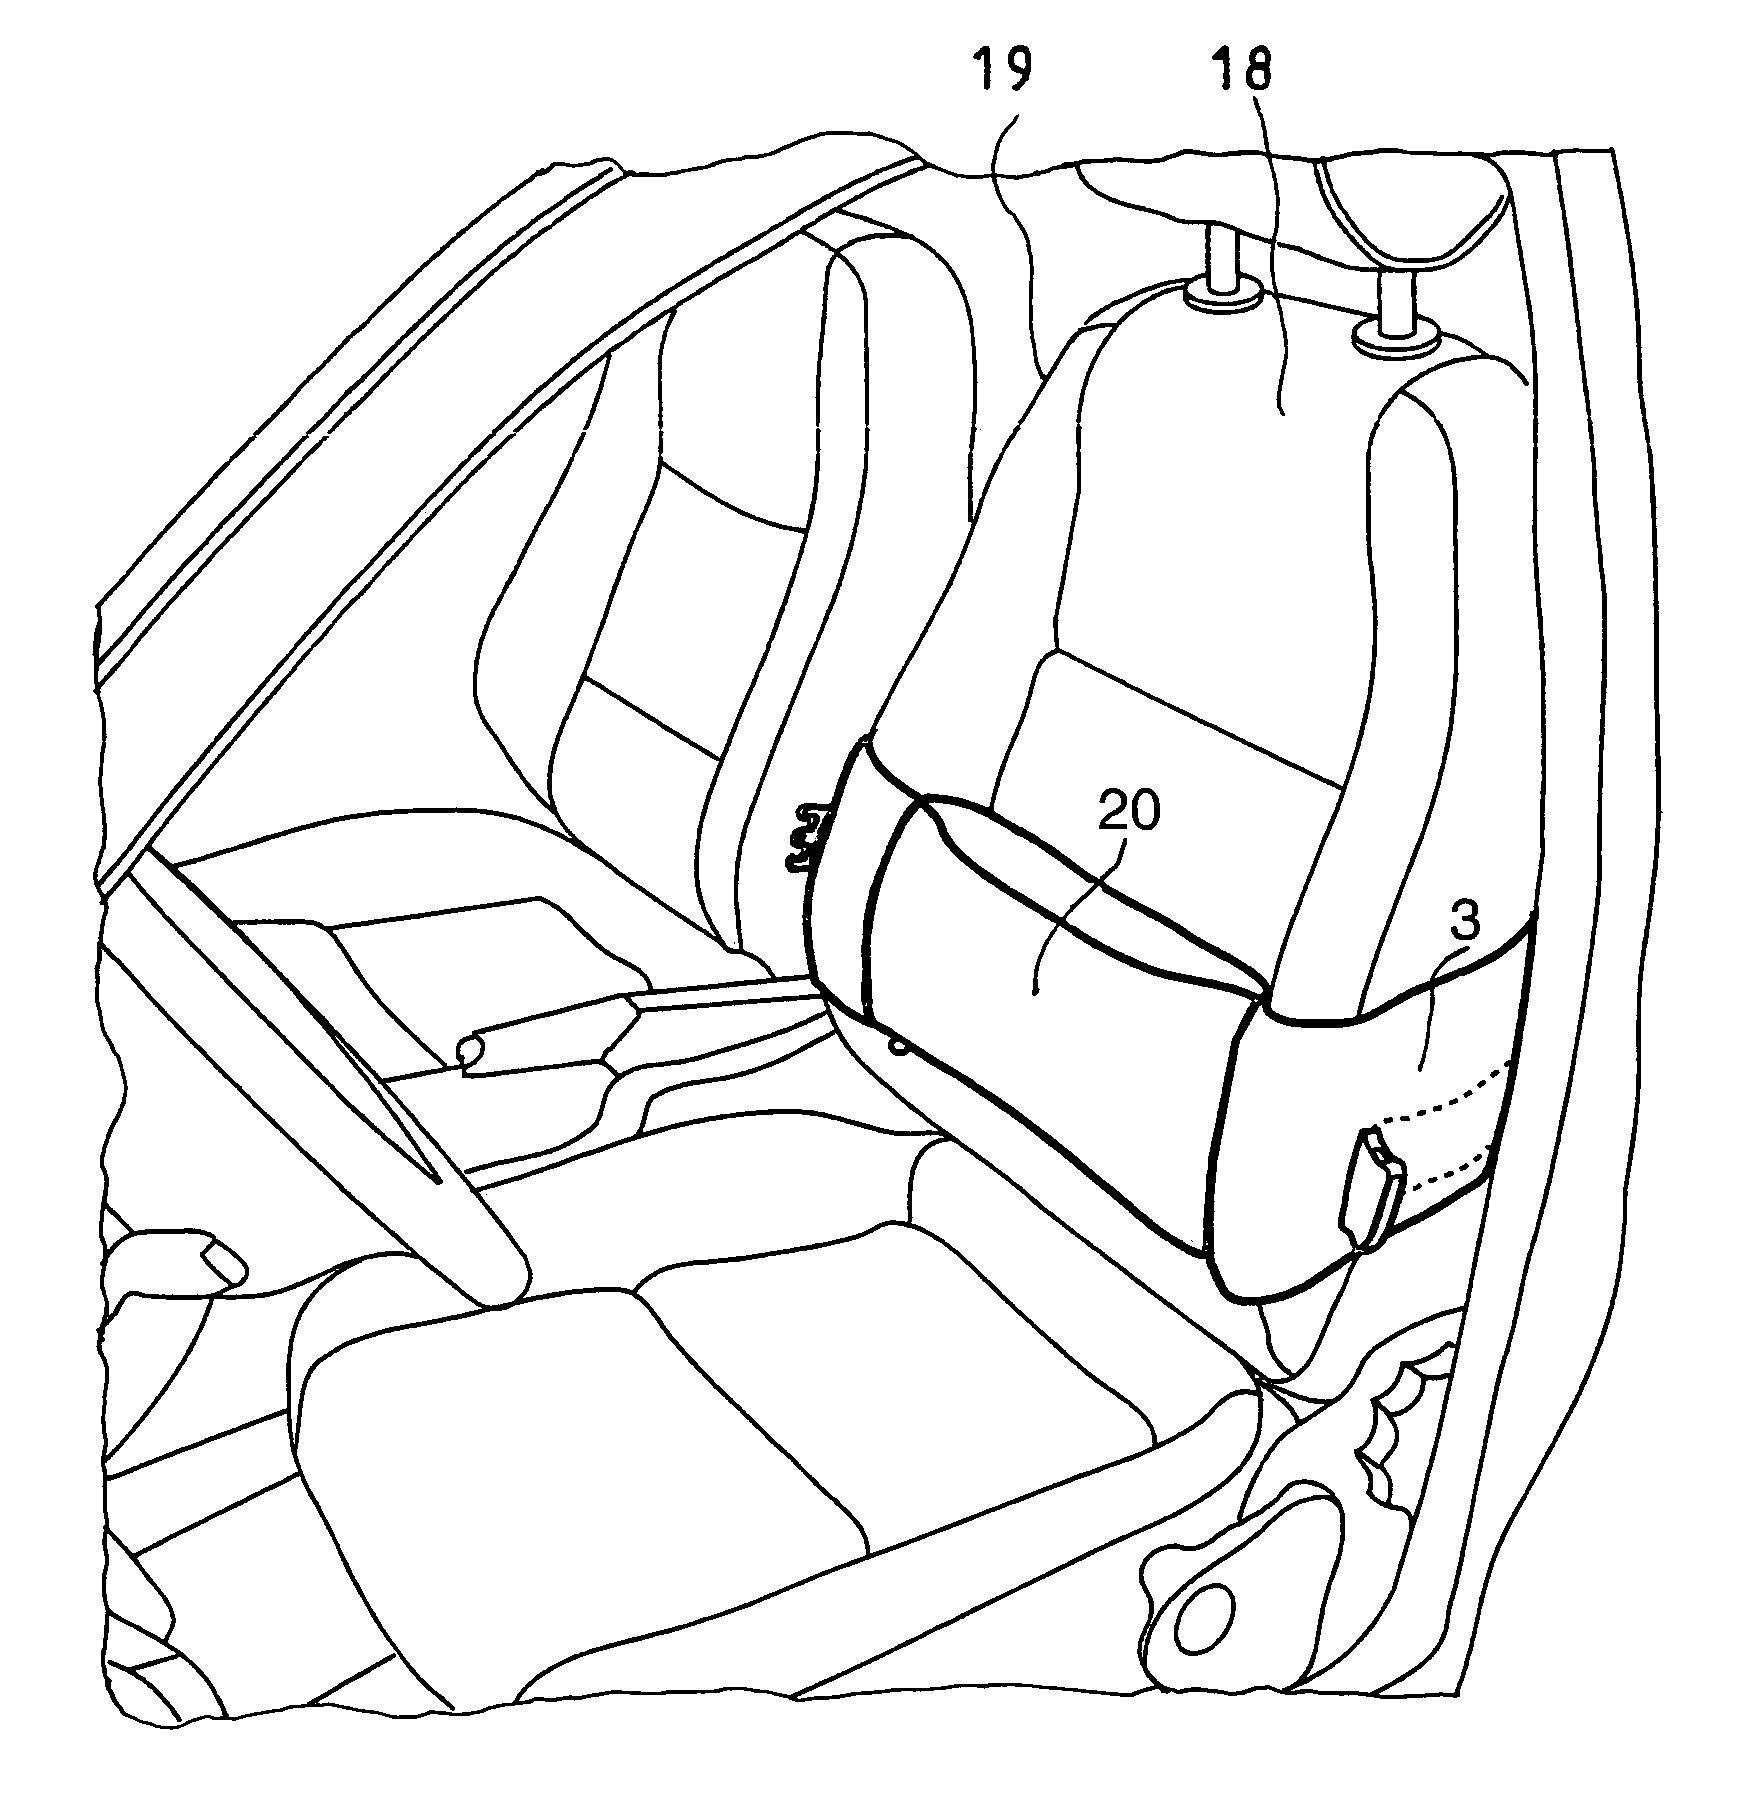 Apparatus for exercising the abdominal muscles in a sitting position